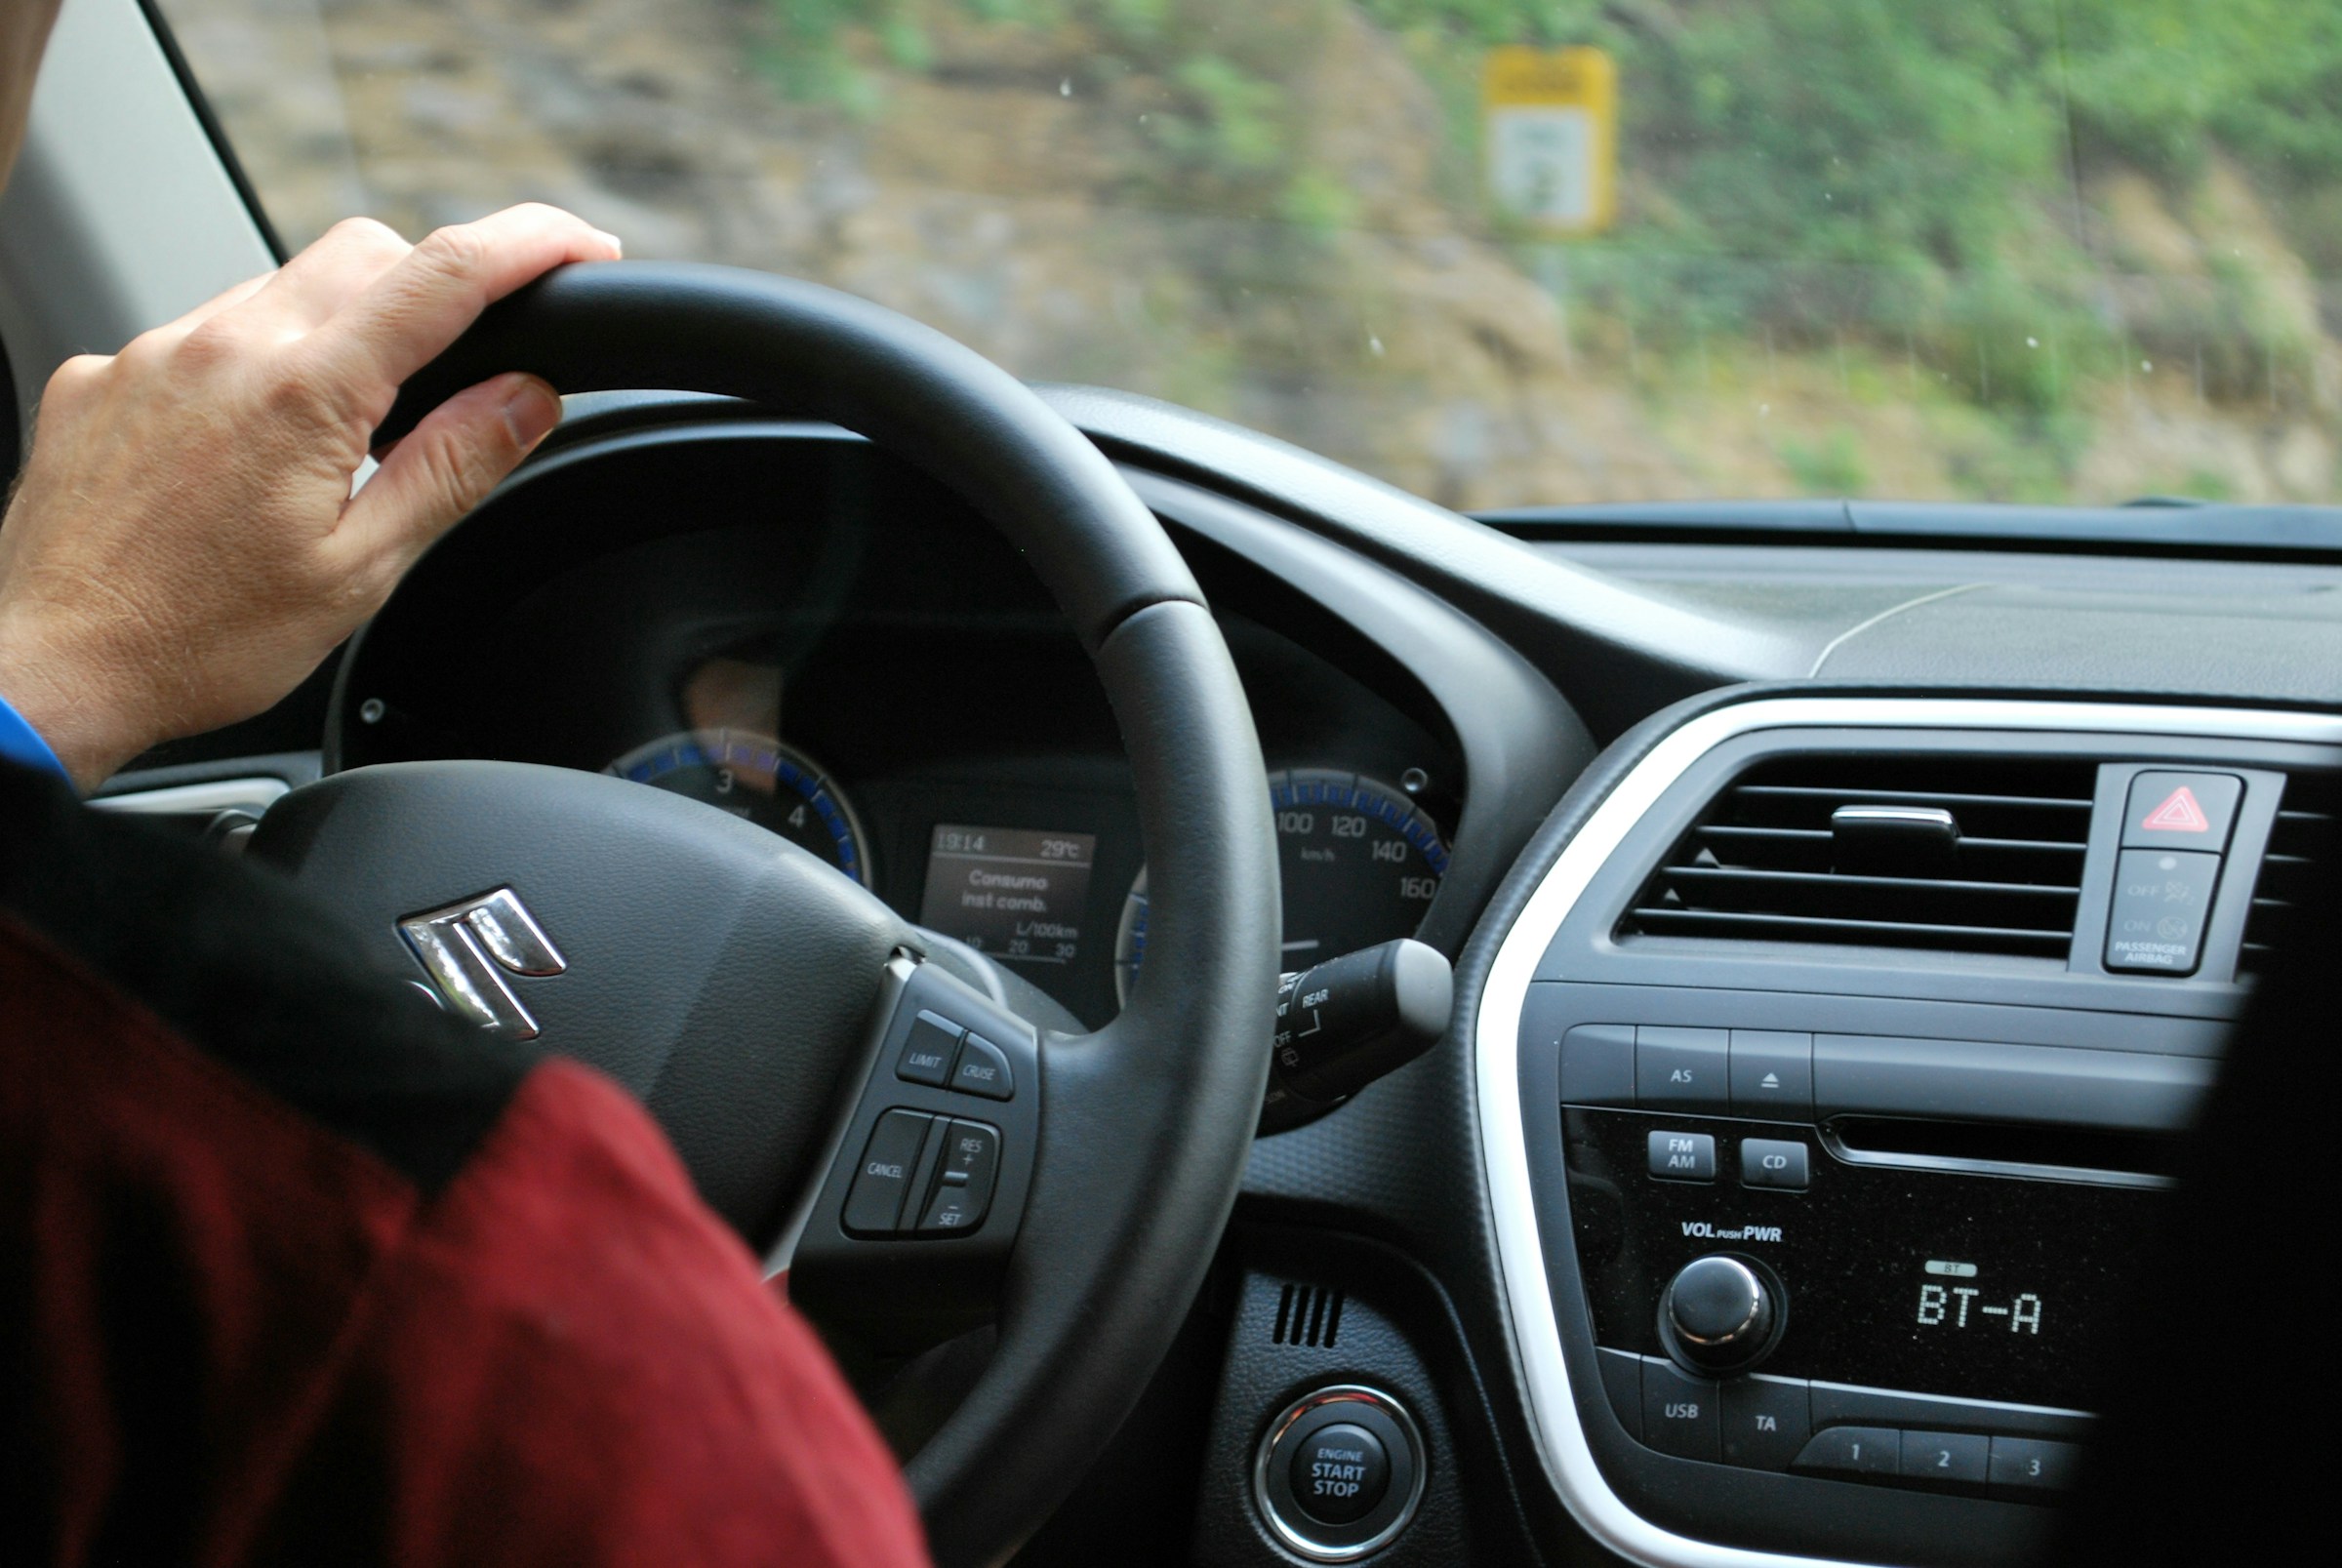 A closeup image of a driver's hand on the steering wheel of their car.